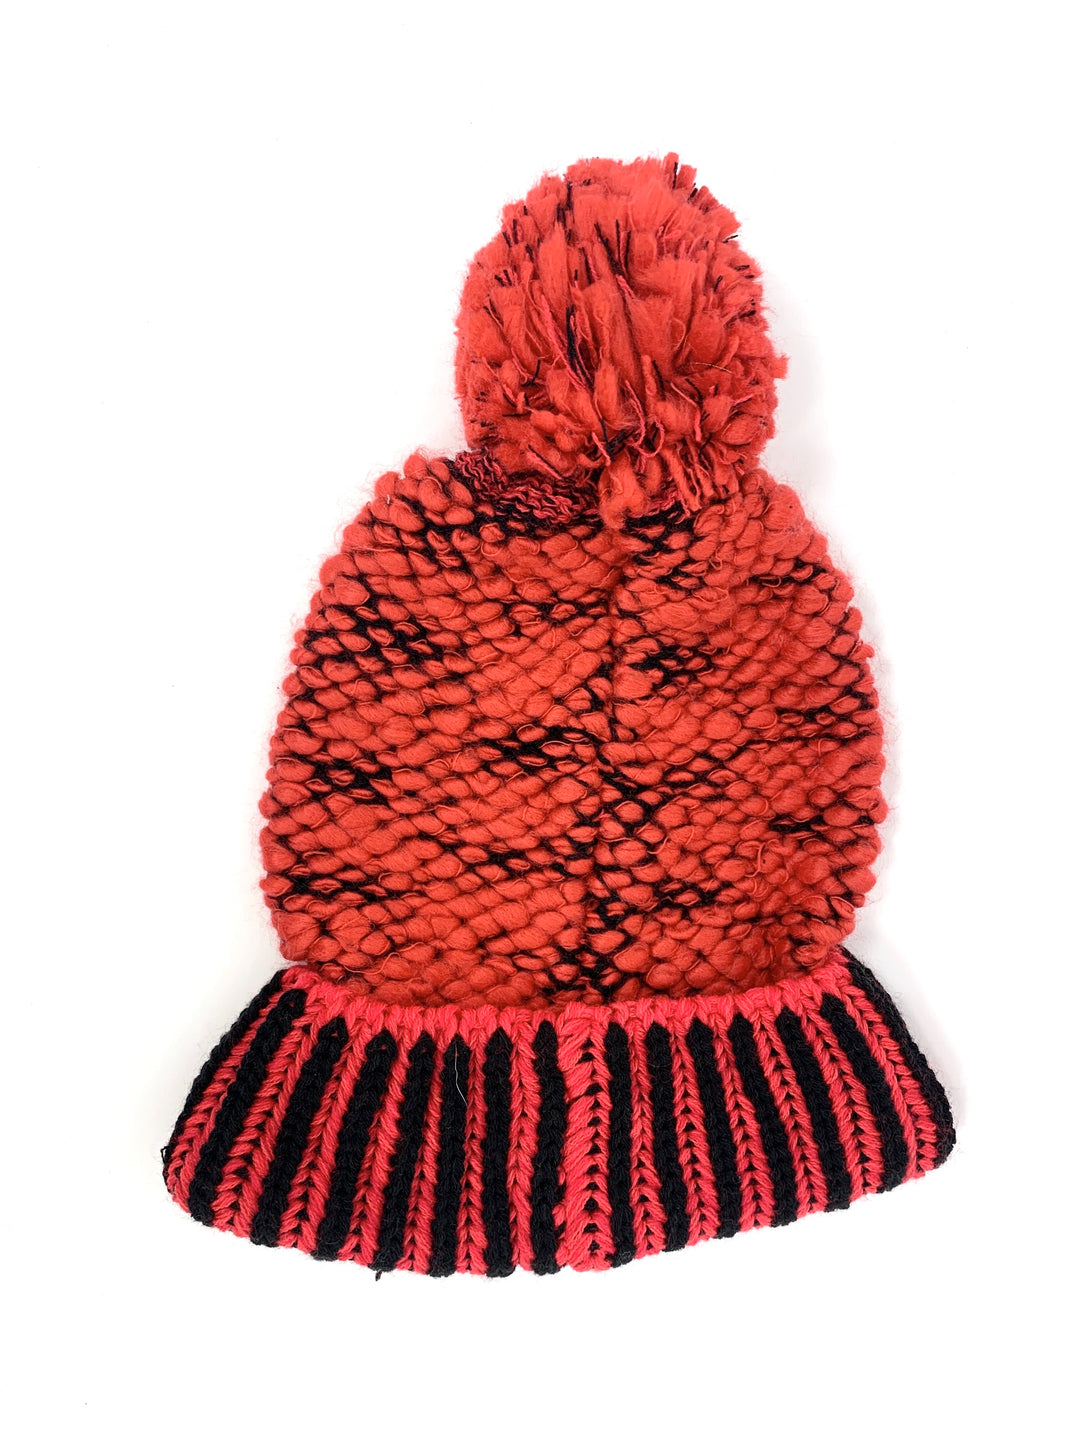 Red and Black Winter Hat